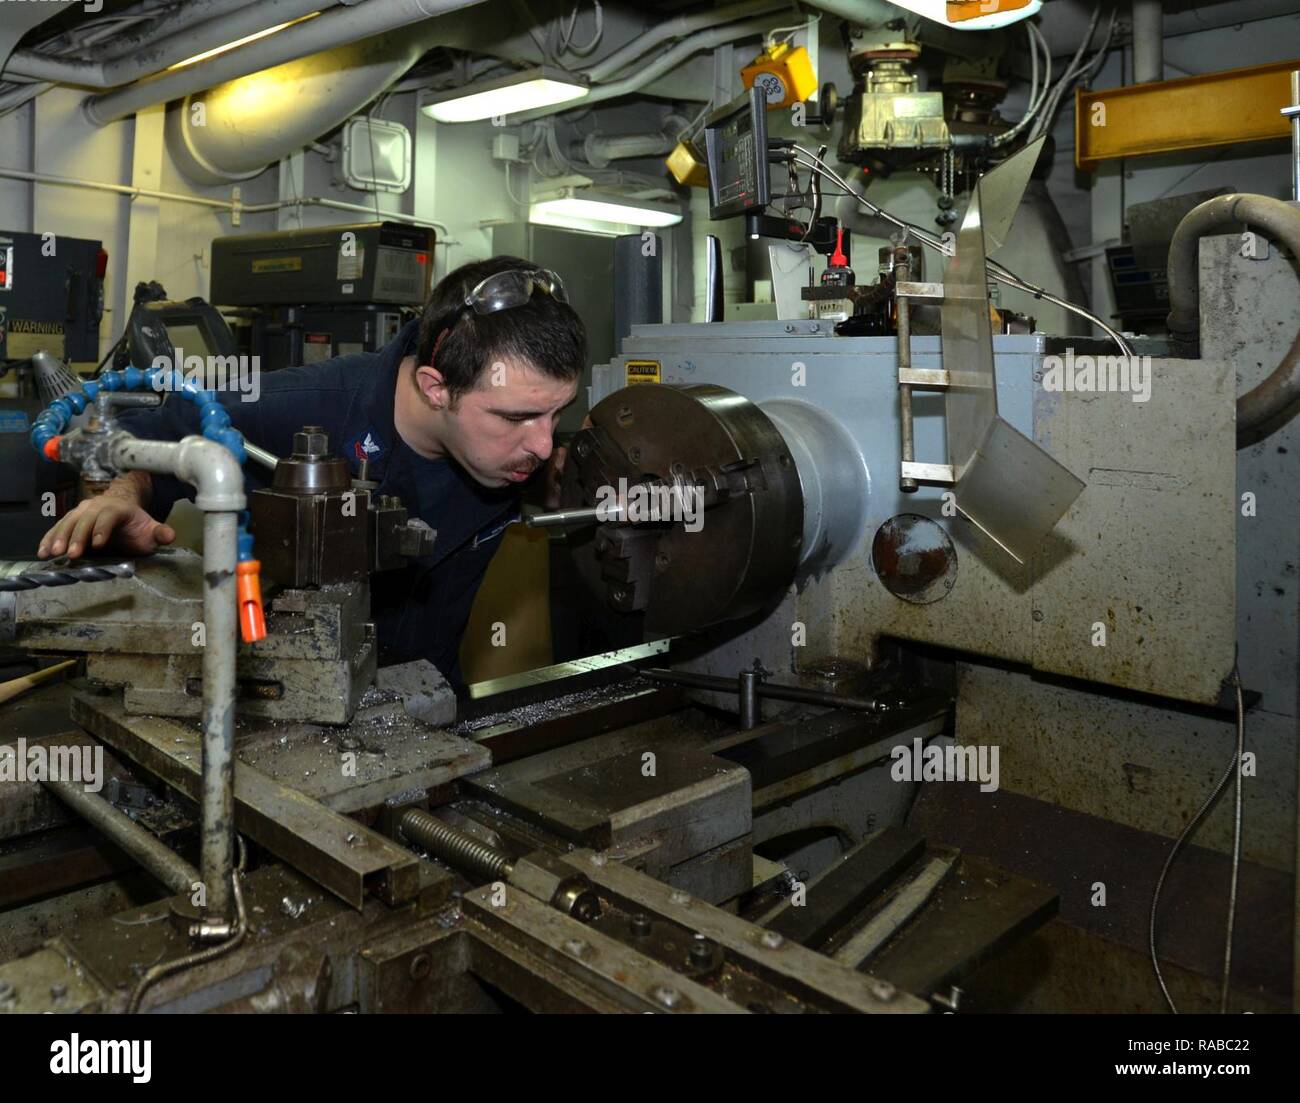 ATLANTIC OCEAN (Jan. 13, 2017) – Machinery Repairman 2nd Class Tim Grover, a native of Hillsboro, Oregon, blows shavings off of a newly cut shaft in the Machine Shop aboard the Wasp-class multipurpose amphibious assault ship USS Bataan (LHD 5). Bataan is underway conducting Composite Training Unit Exercise (COMPTUEX) with the Bataan Amphibious Ready Group in preparation for an upcoming deployment. Stock Photo